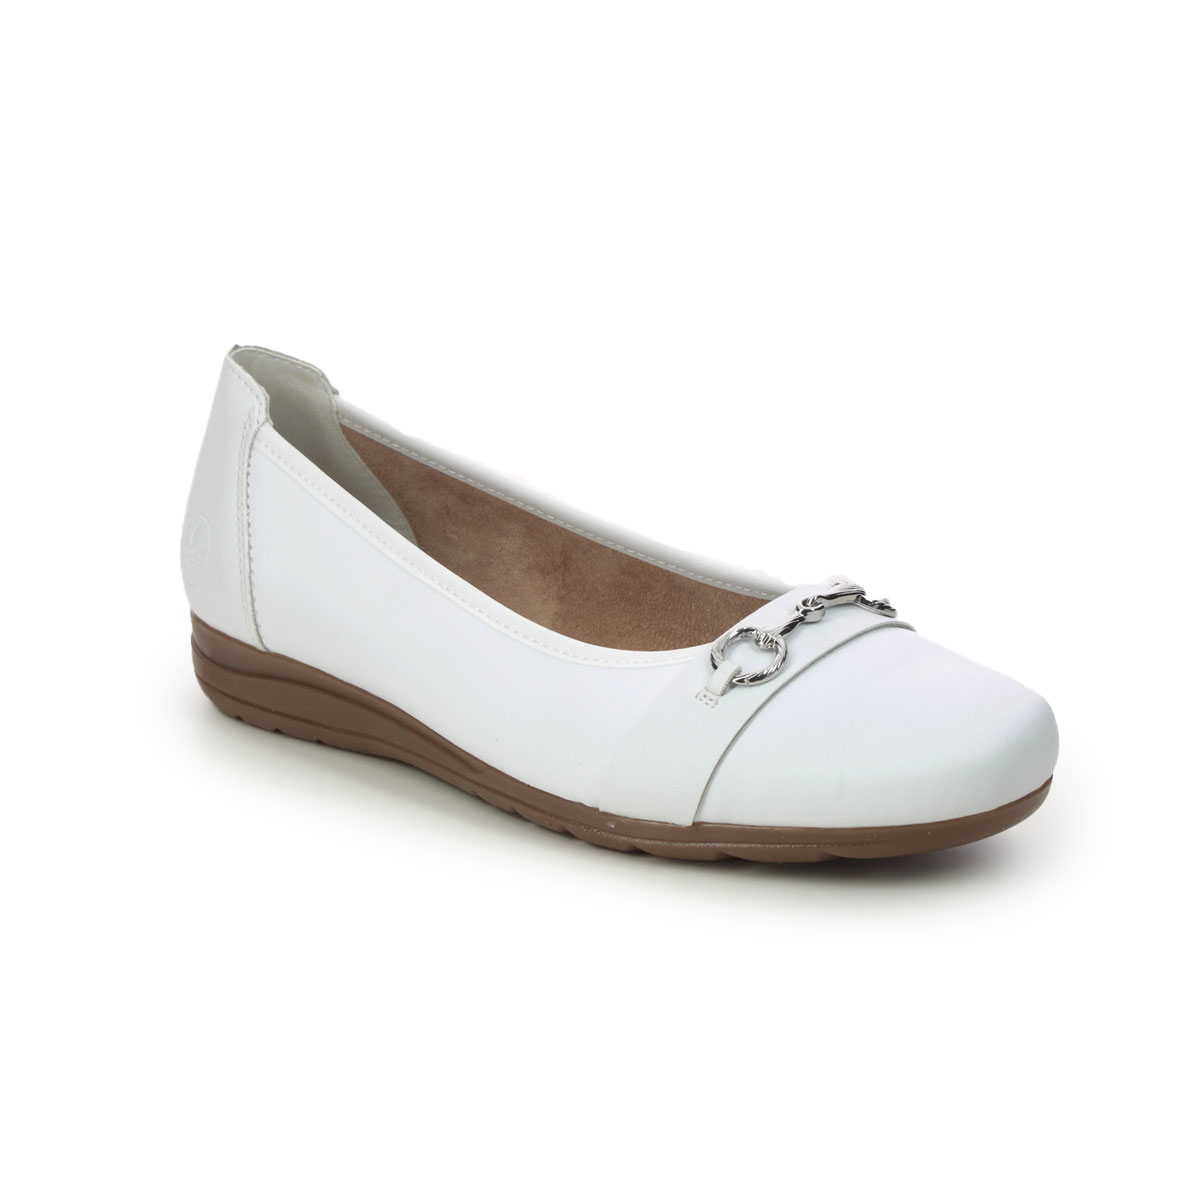 Rieker L9360-80 WHITE LEATHER Womens pumps in a Plain Leather in Size 38